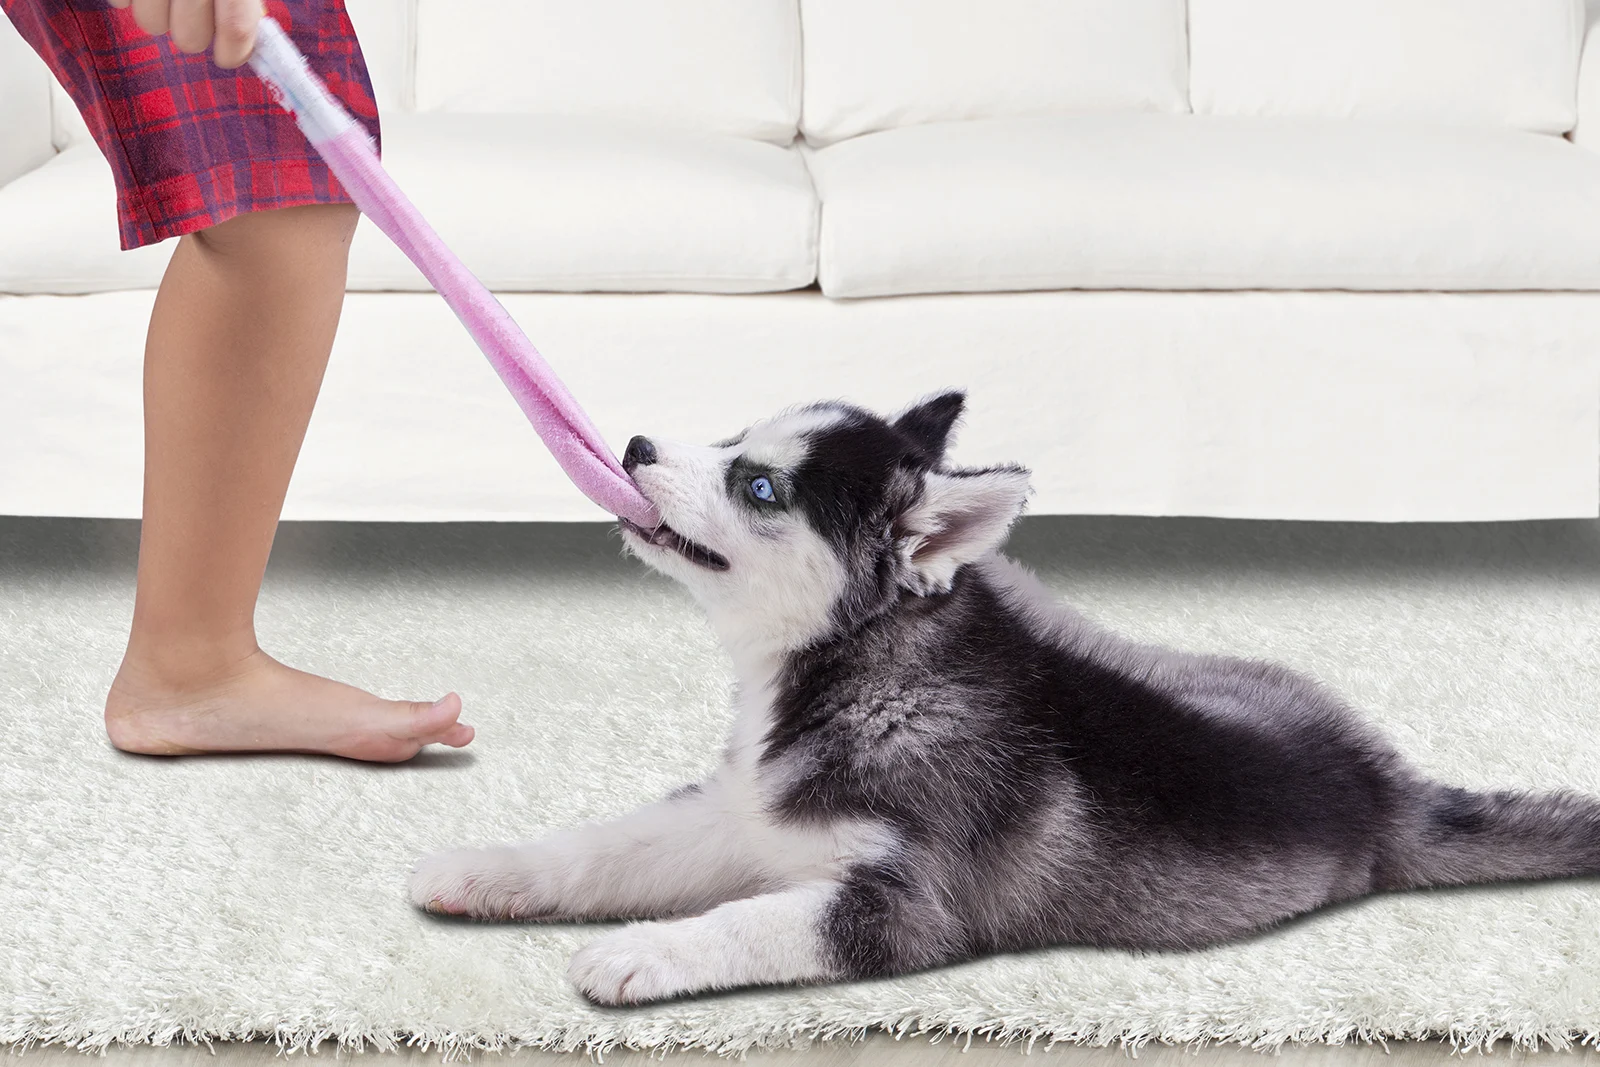  siberian husky puppy biting a sock and playing with a boy